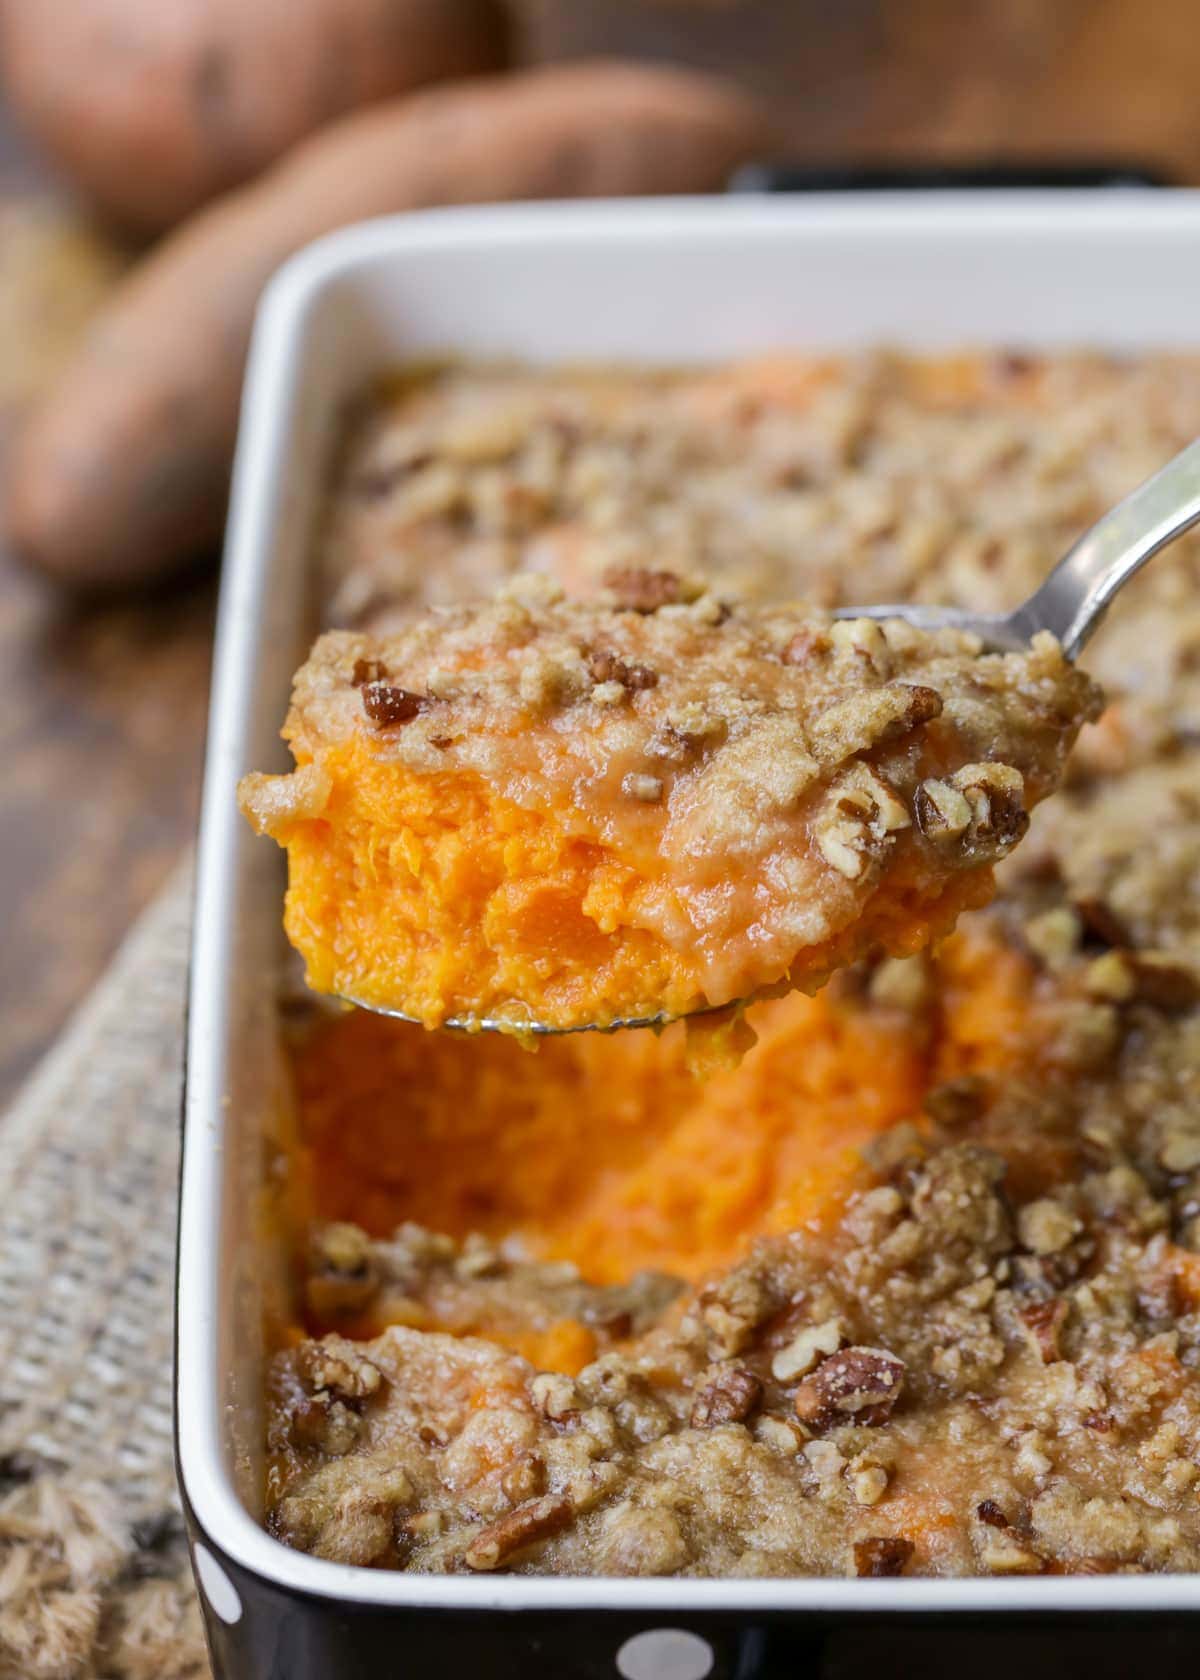 Sweet Potato casserole recipe spooned out from baking dish.